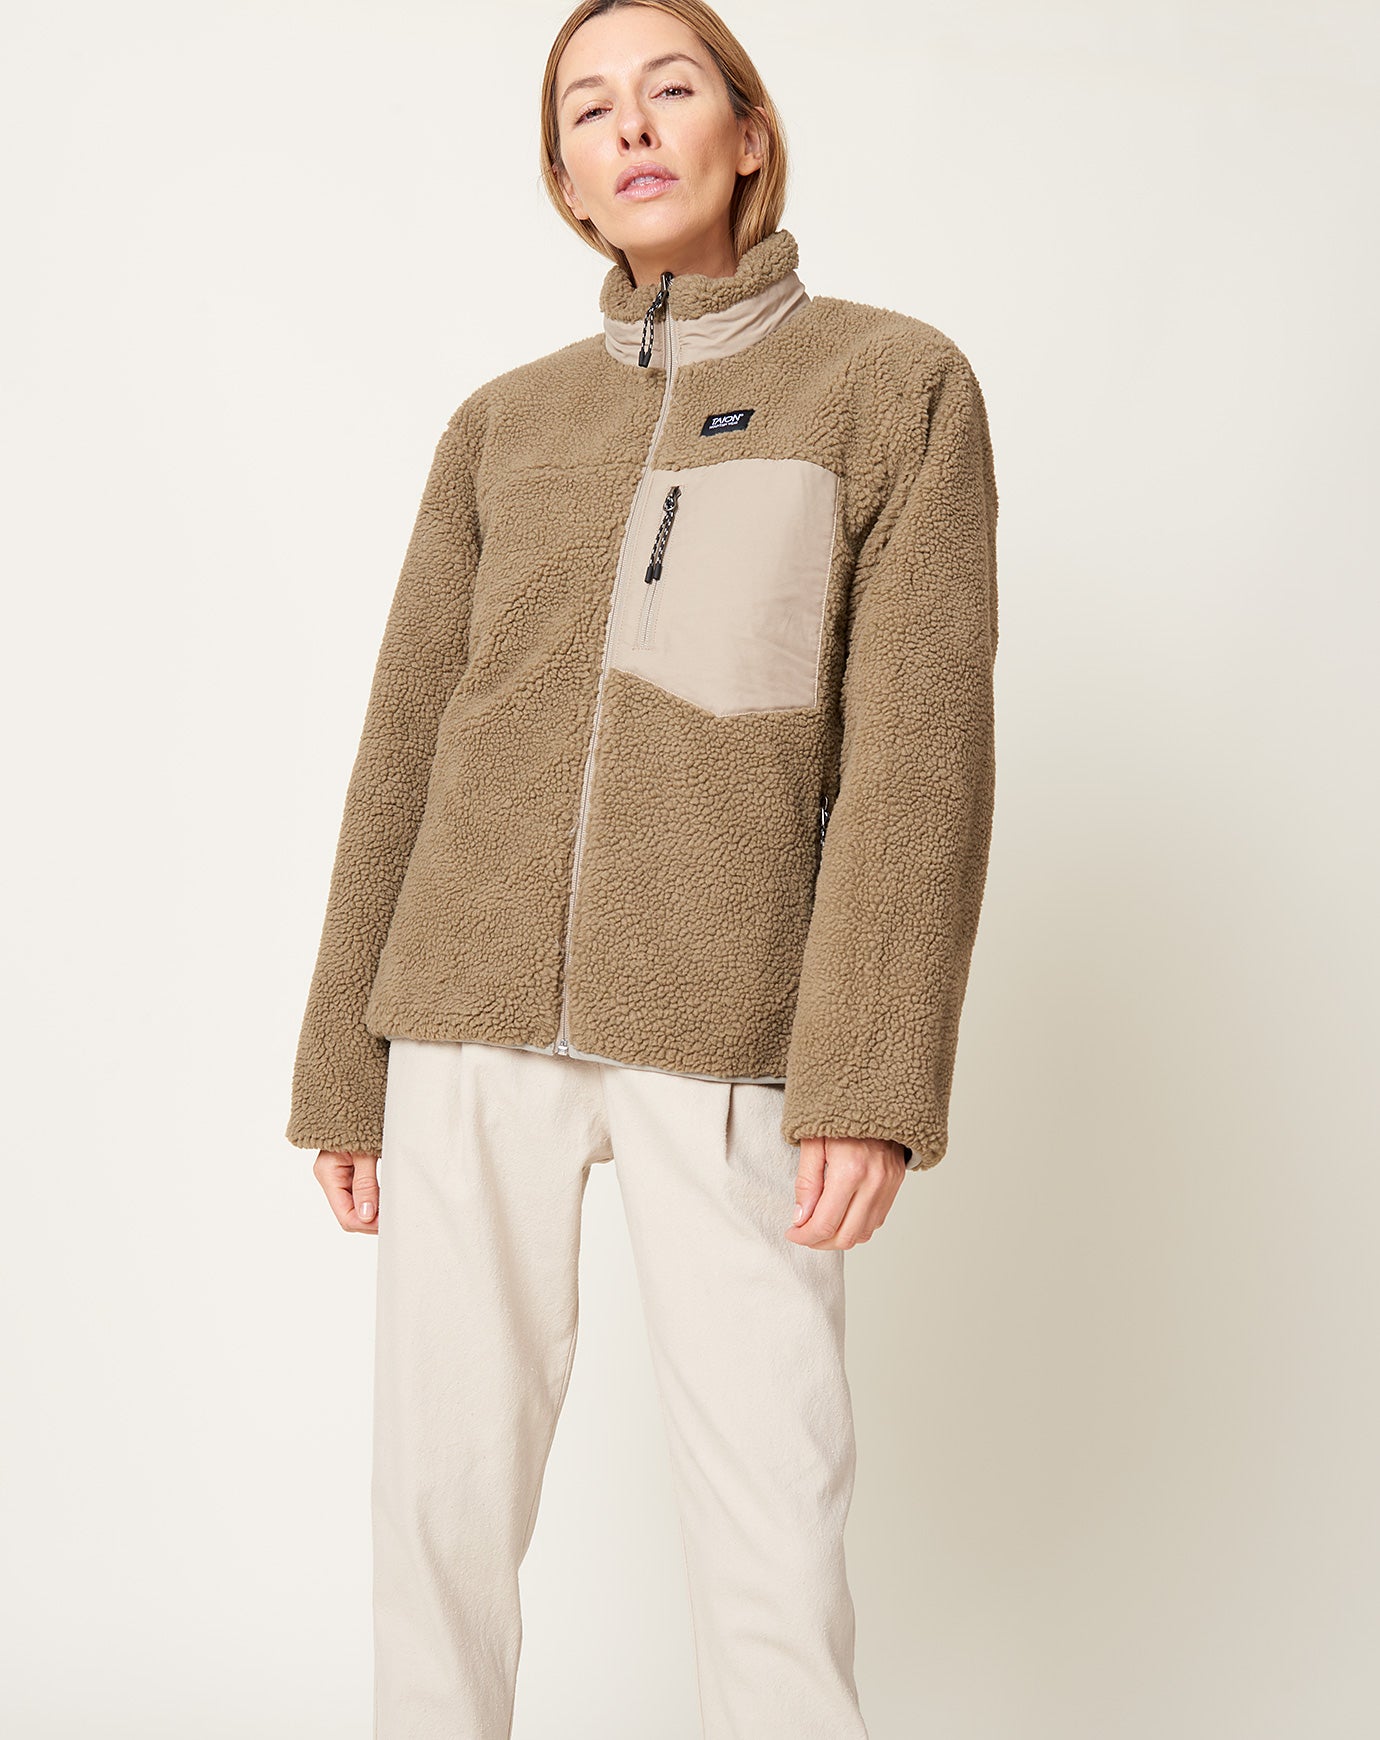 Mountain Down X BOA Reversible Jacket in Light Grey and Beige